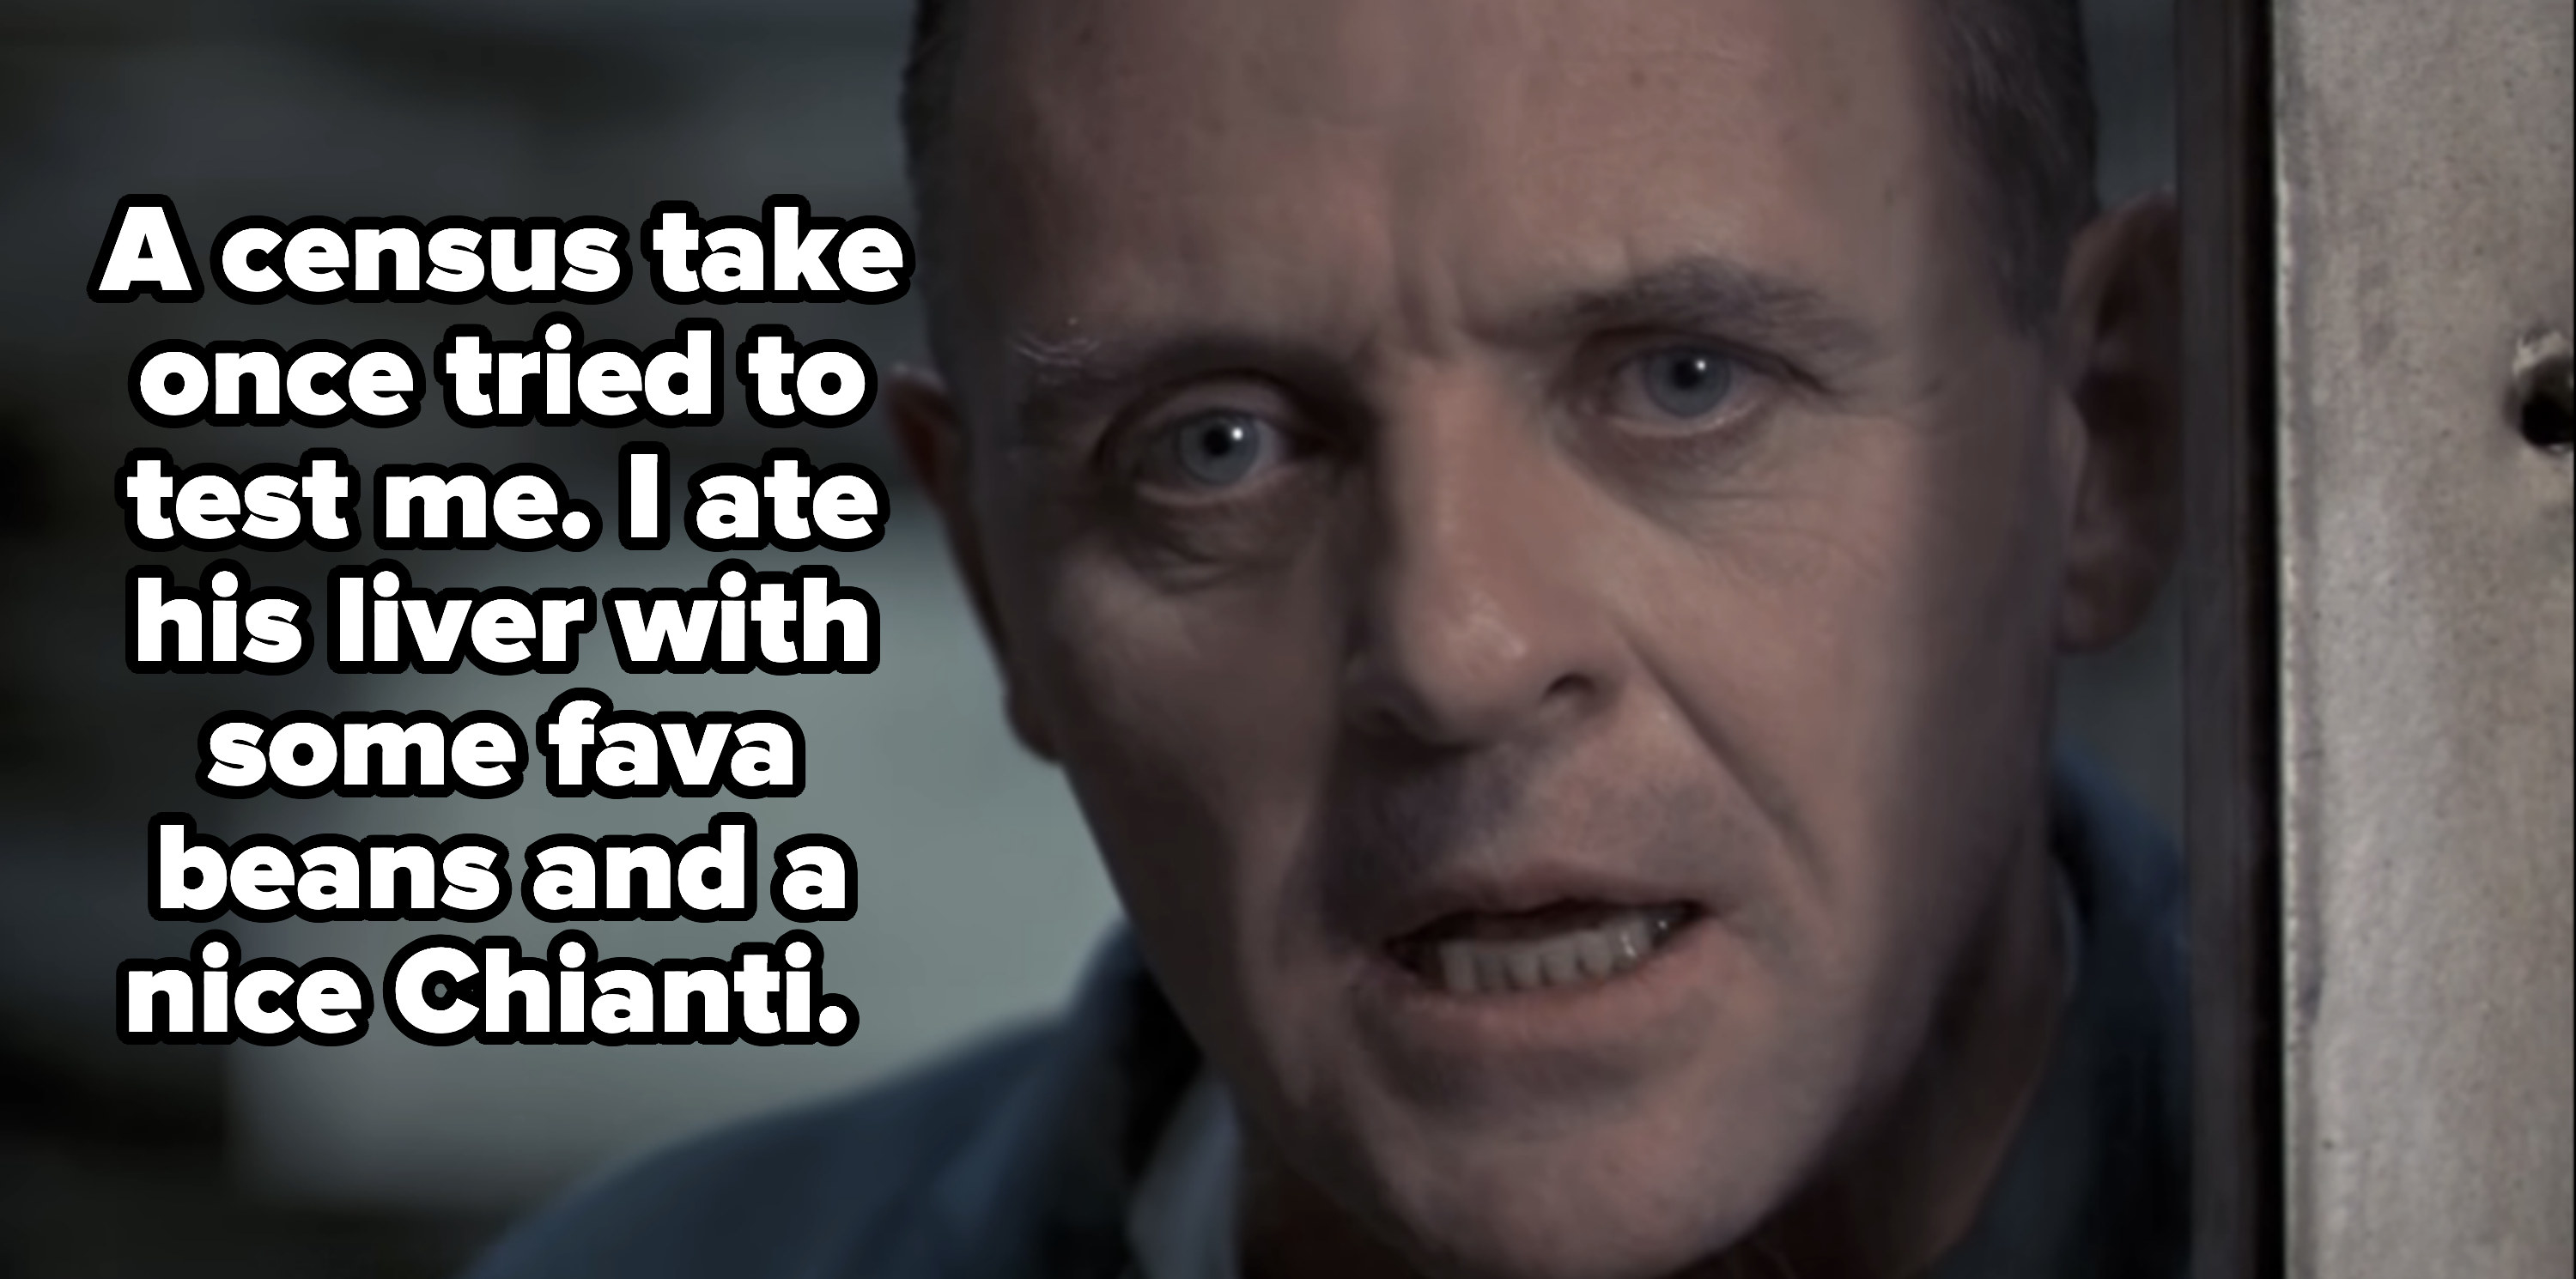 Hannibal Lecter saying, &quot;I ate his liver with some fava beans and a nice Chianti.&quot;